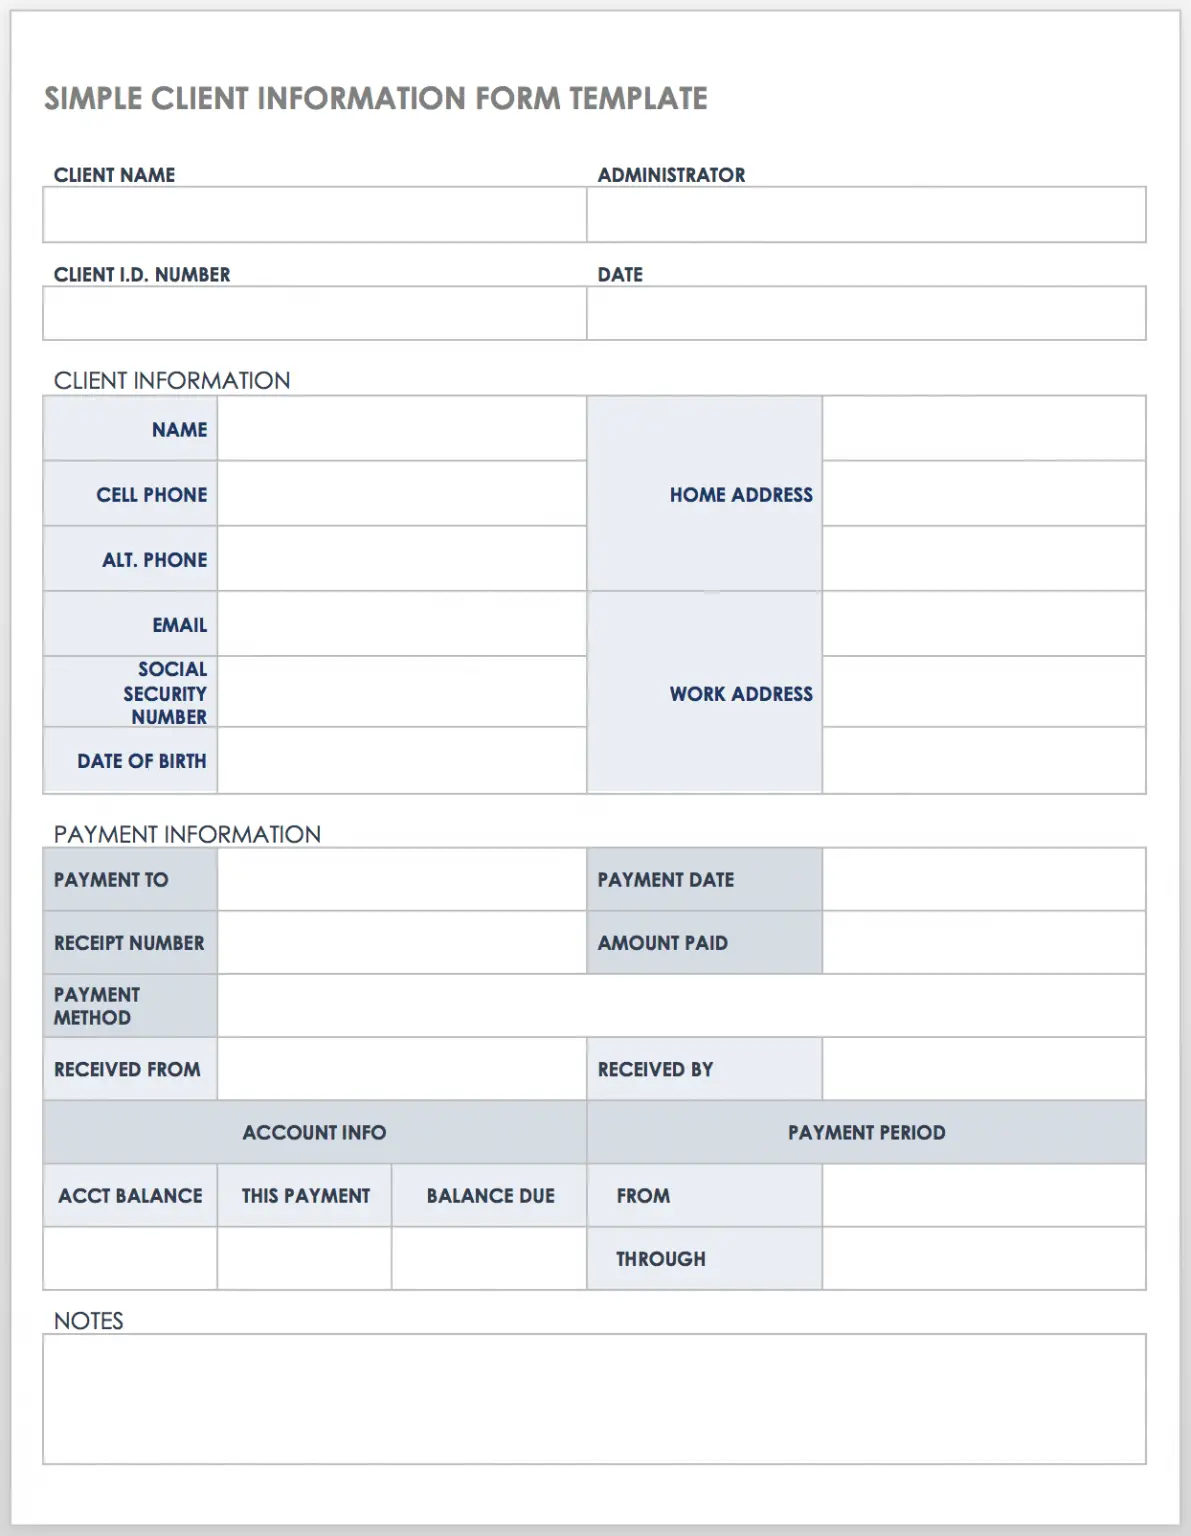 printable-new-client-information-form-template-printable-forms-free-online